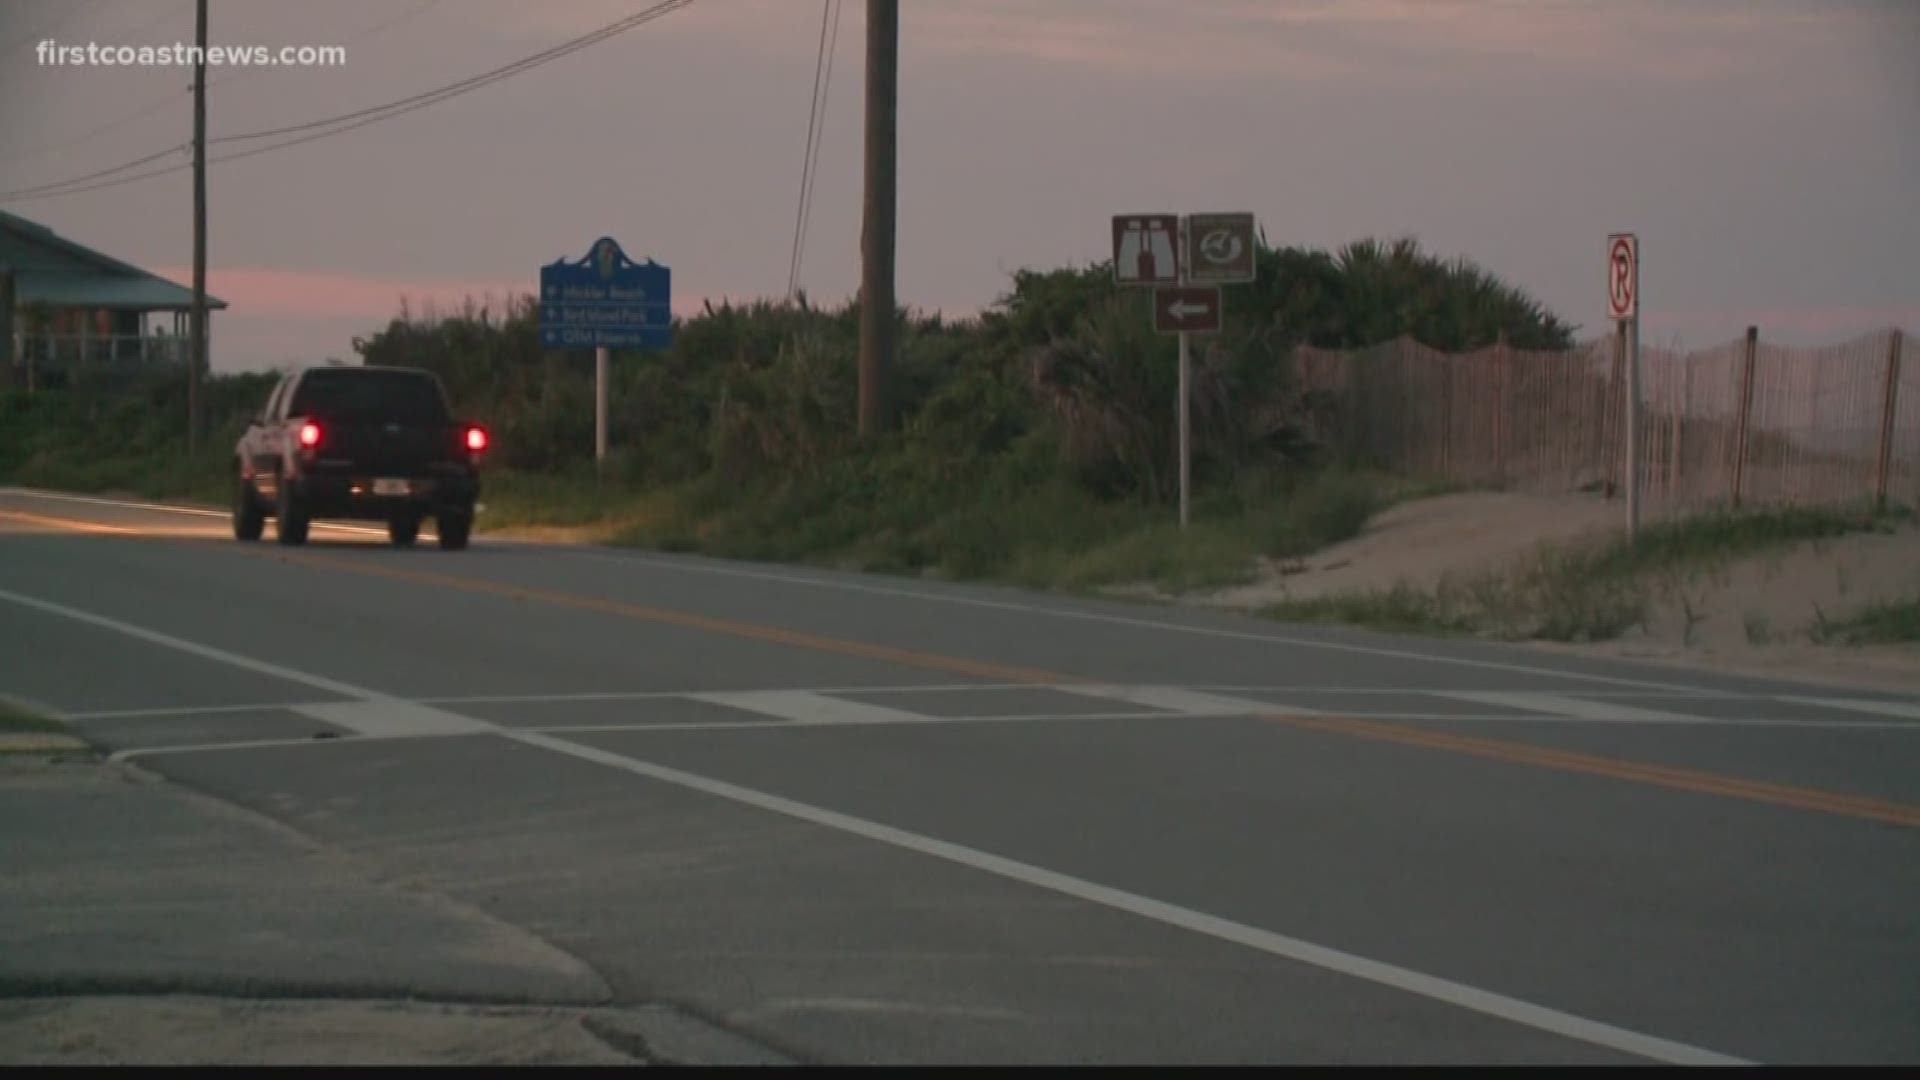 A bicyclist died Saturday morning after she was struck by a vehicle traveling along State Road A1A in Ponte Vedra Beach, according to Florida Highway Patrol. Are the bike lanes wide enough?